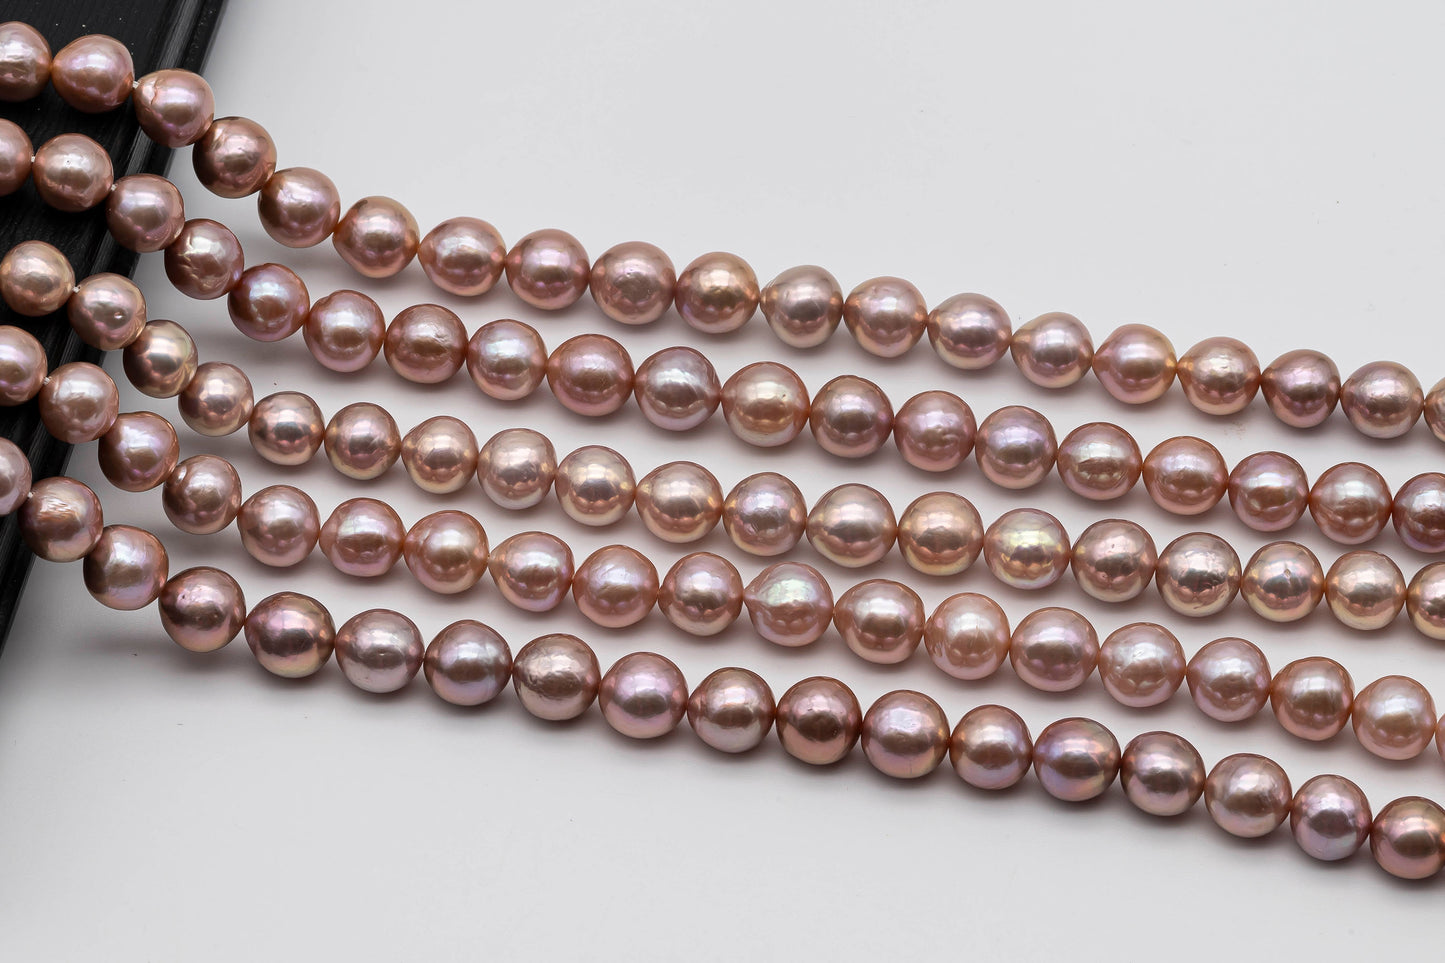 9-11mm Near Round Edison Pearl with Nice Luster in Natural Pink or Lavender in Full Strand for Making Jewelry or Beading, SKU # 1347EP